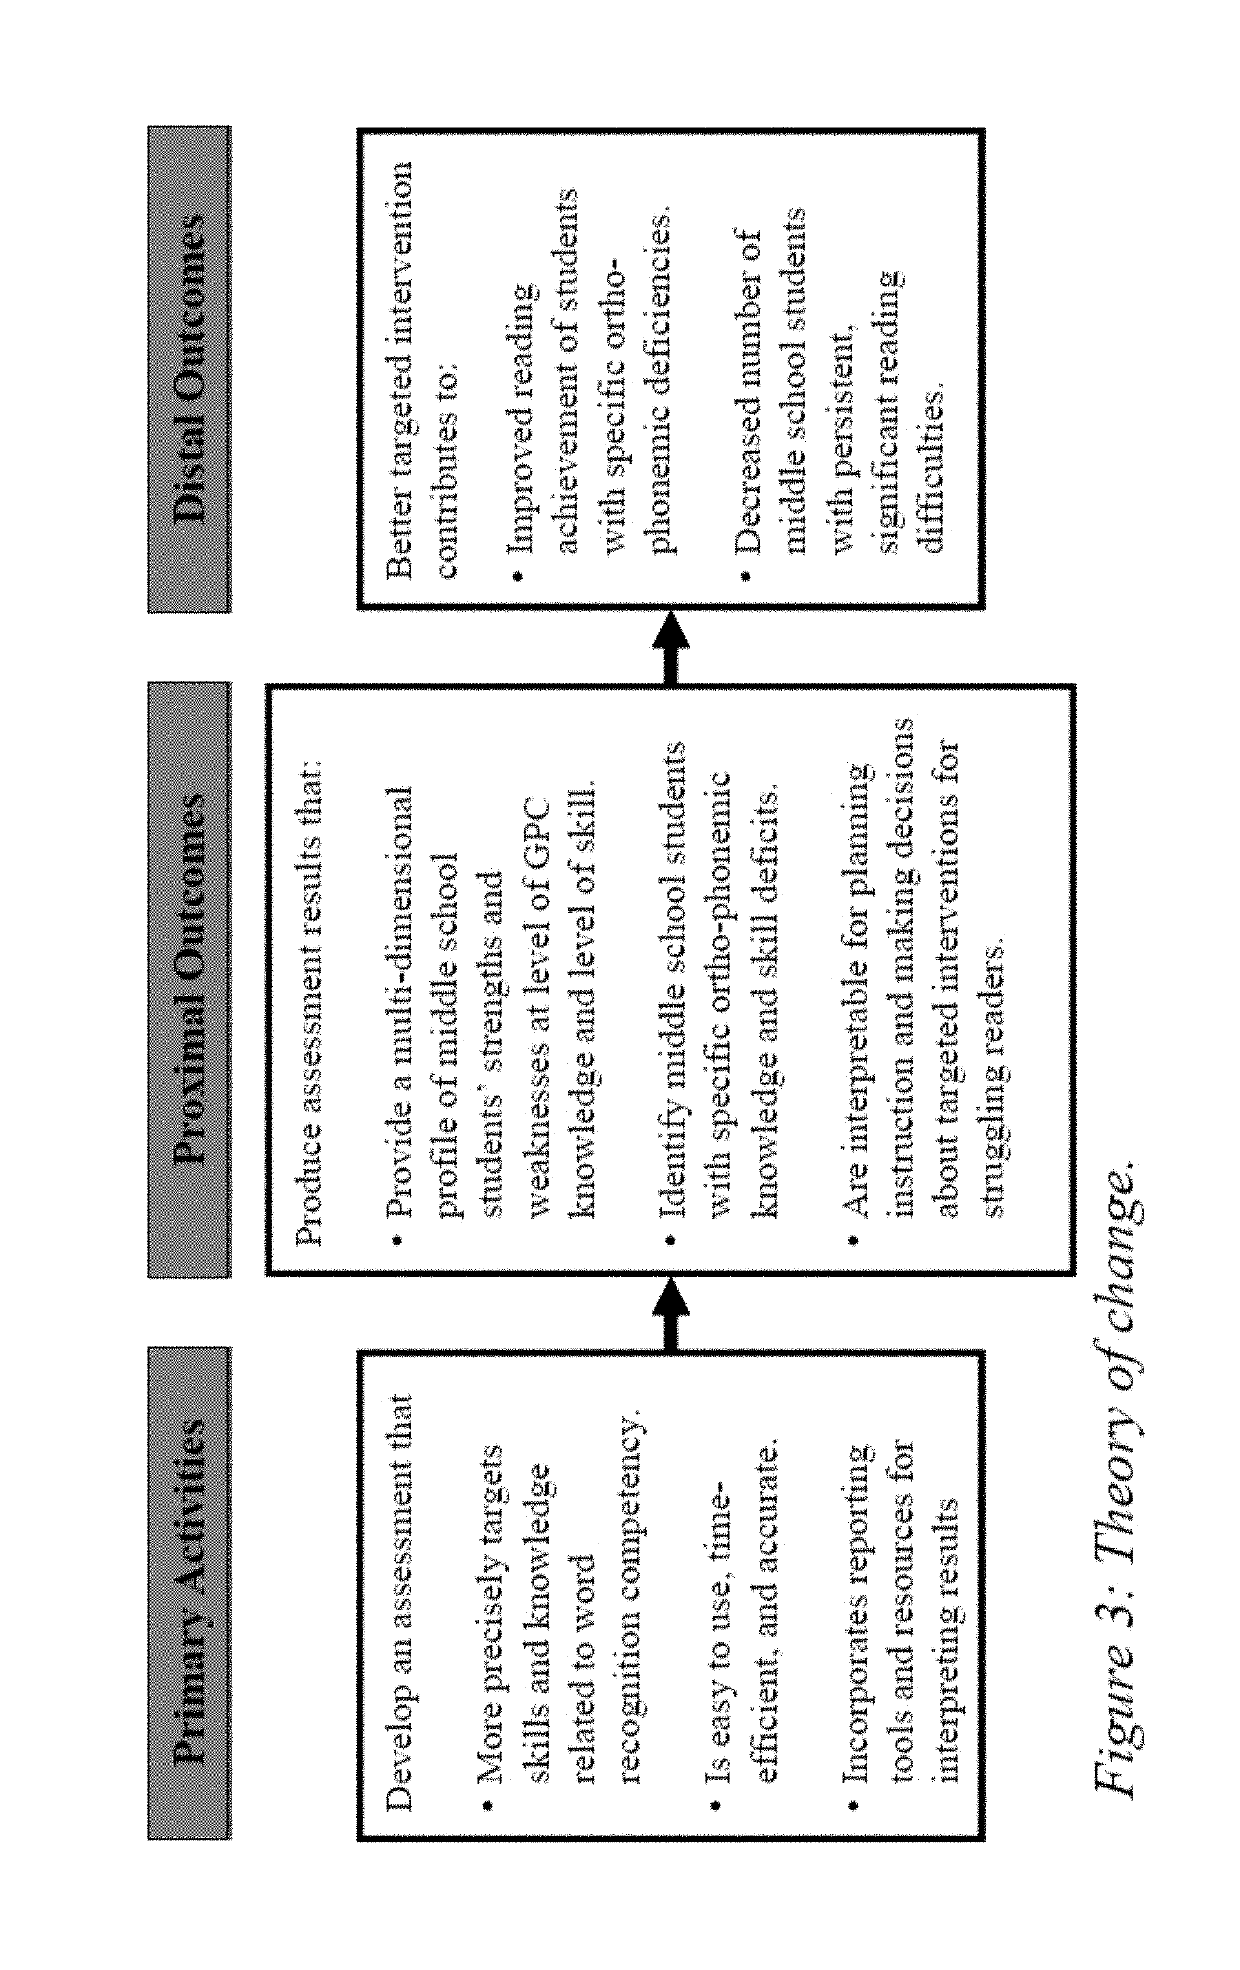 System and method for assessments of student deficiencies relative to rules-based systems, including but not limited to, ortho-phonemic difficulties to assist reading and literacy skills